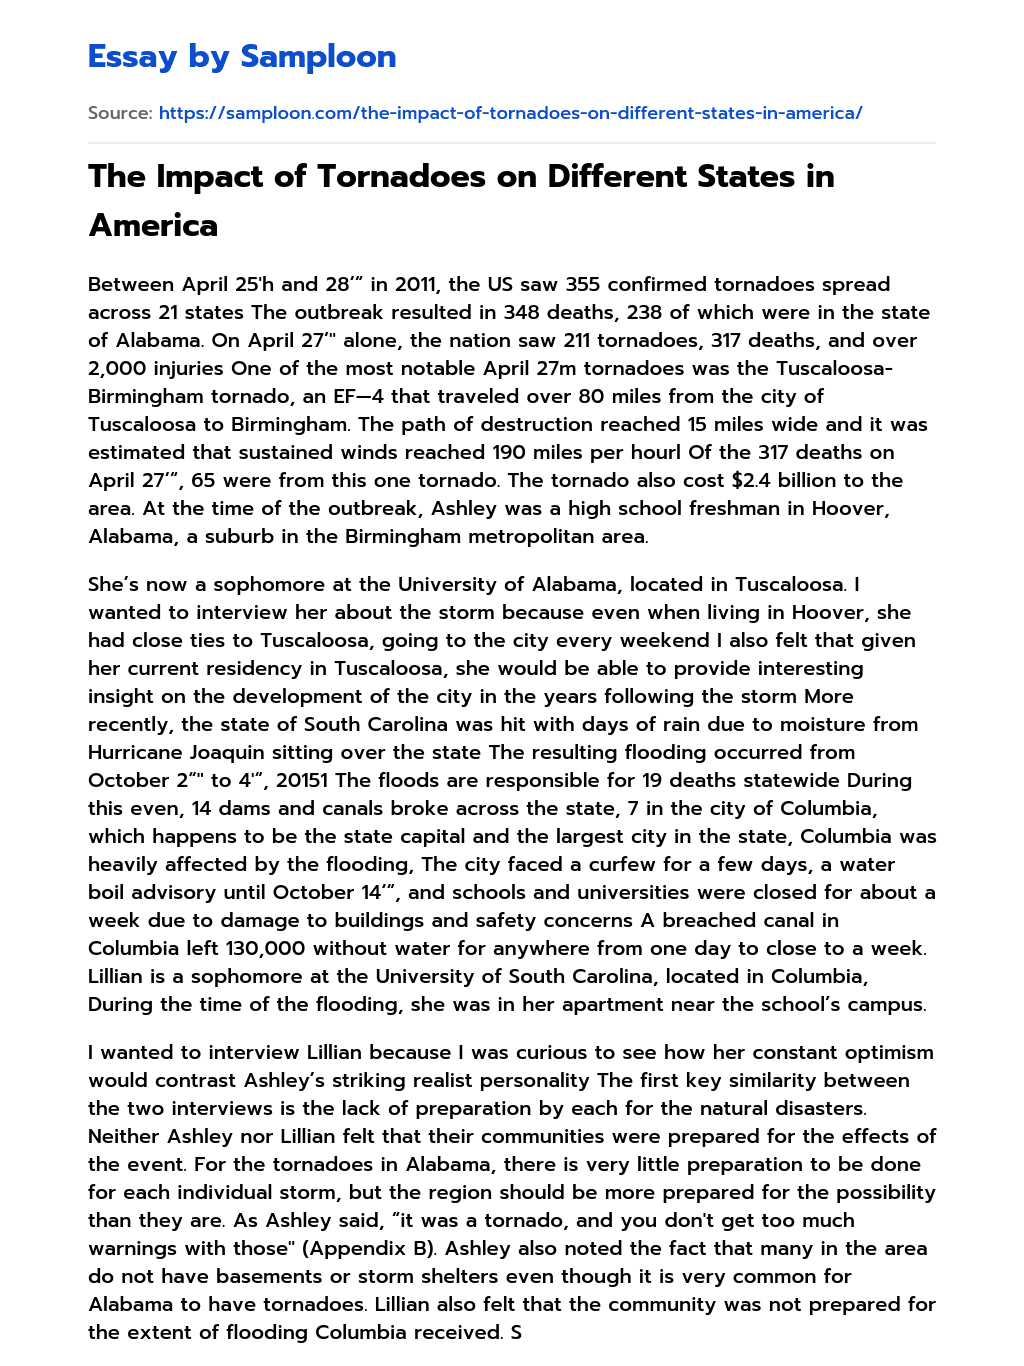 The Impact of Tornadoes on Different States in America essay